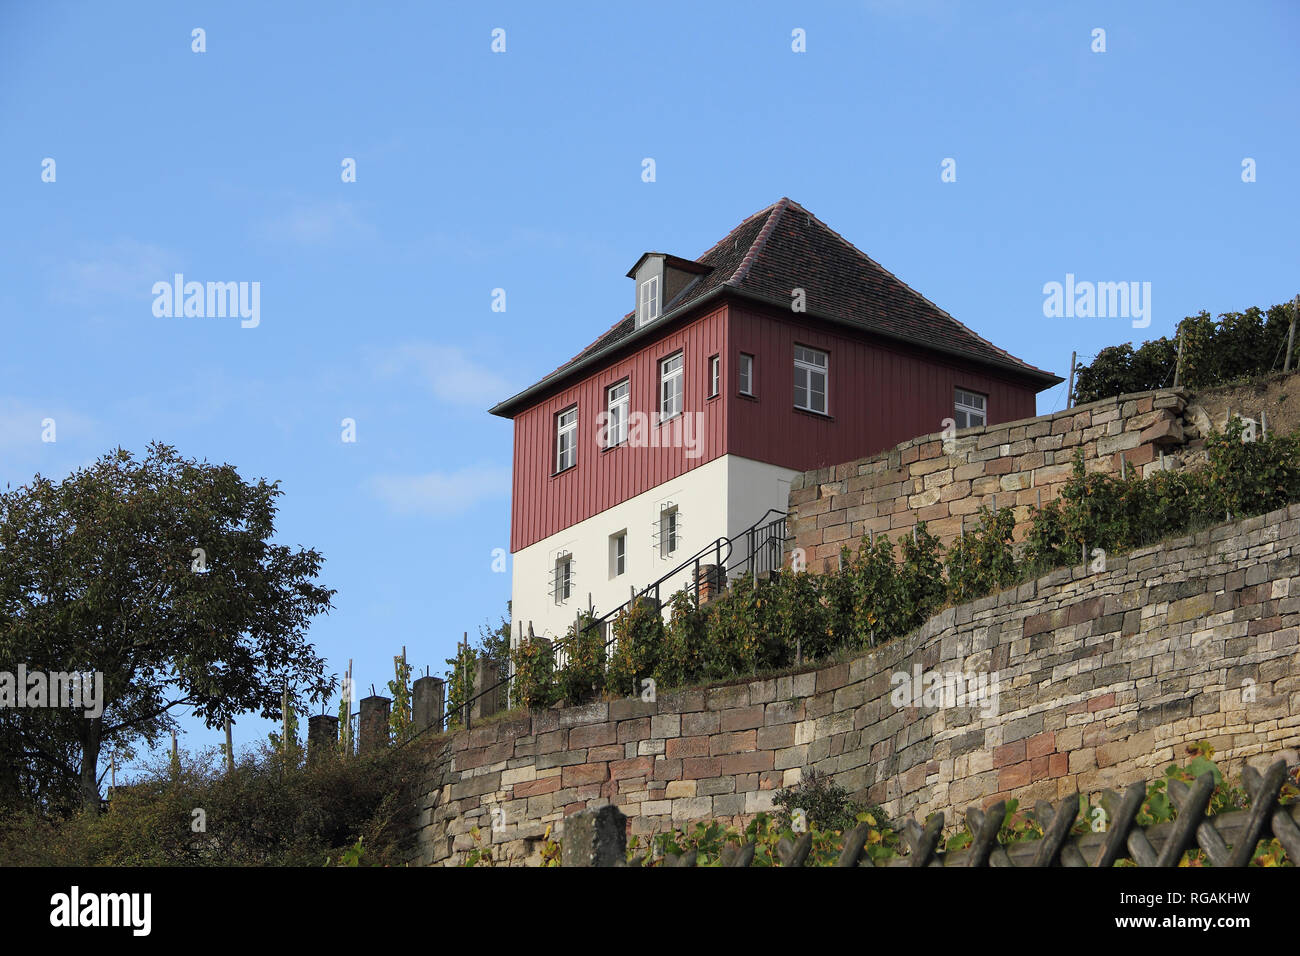 Country house and vineyard at Bluetengrund in Grossjena, Germany Stock Photo